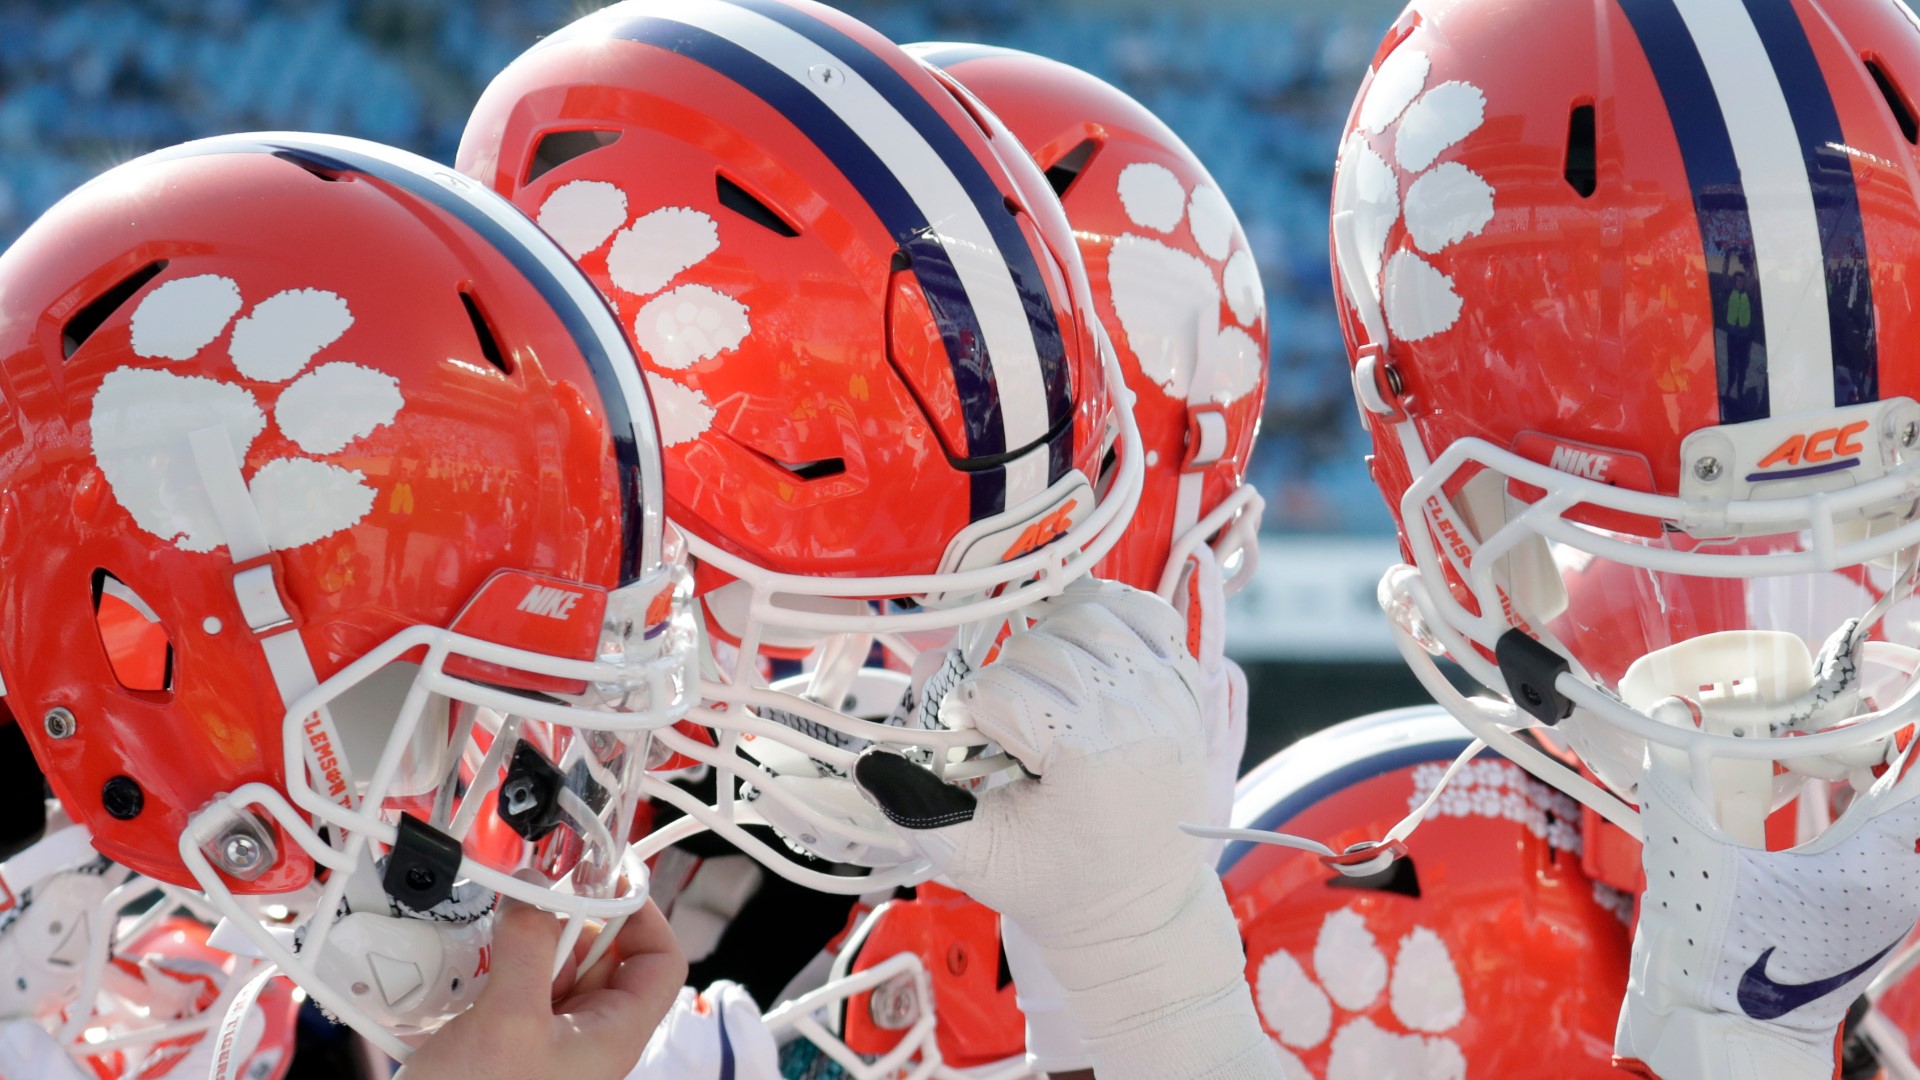 Clemson University said 28 of its student-athletes have tested positive for the coronavirus.